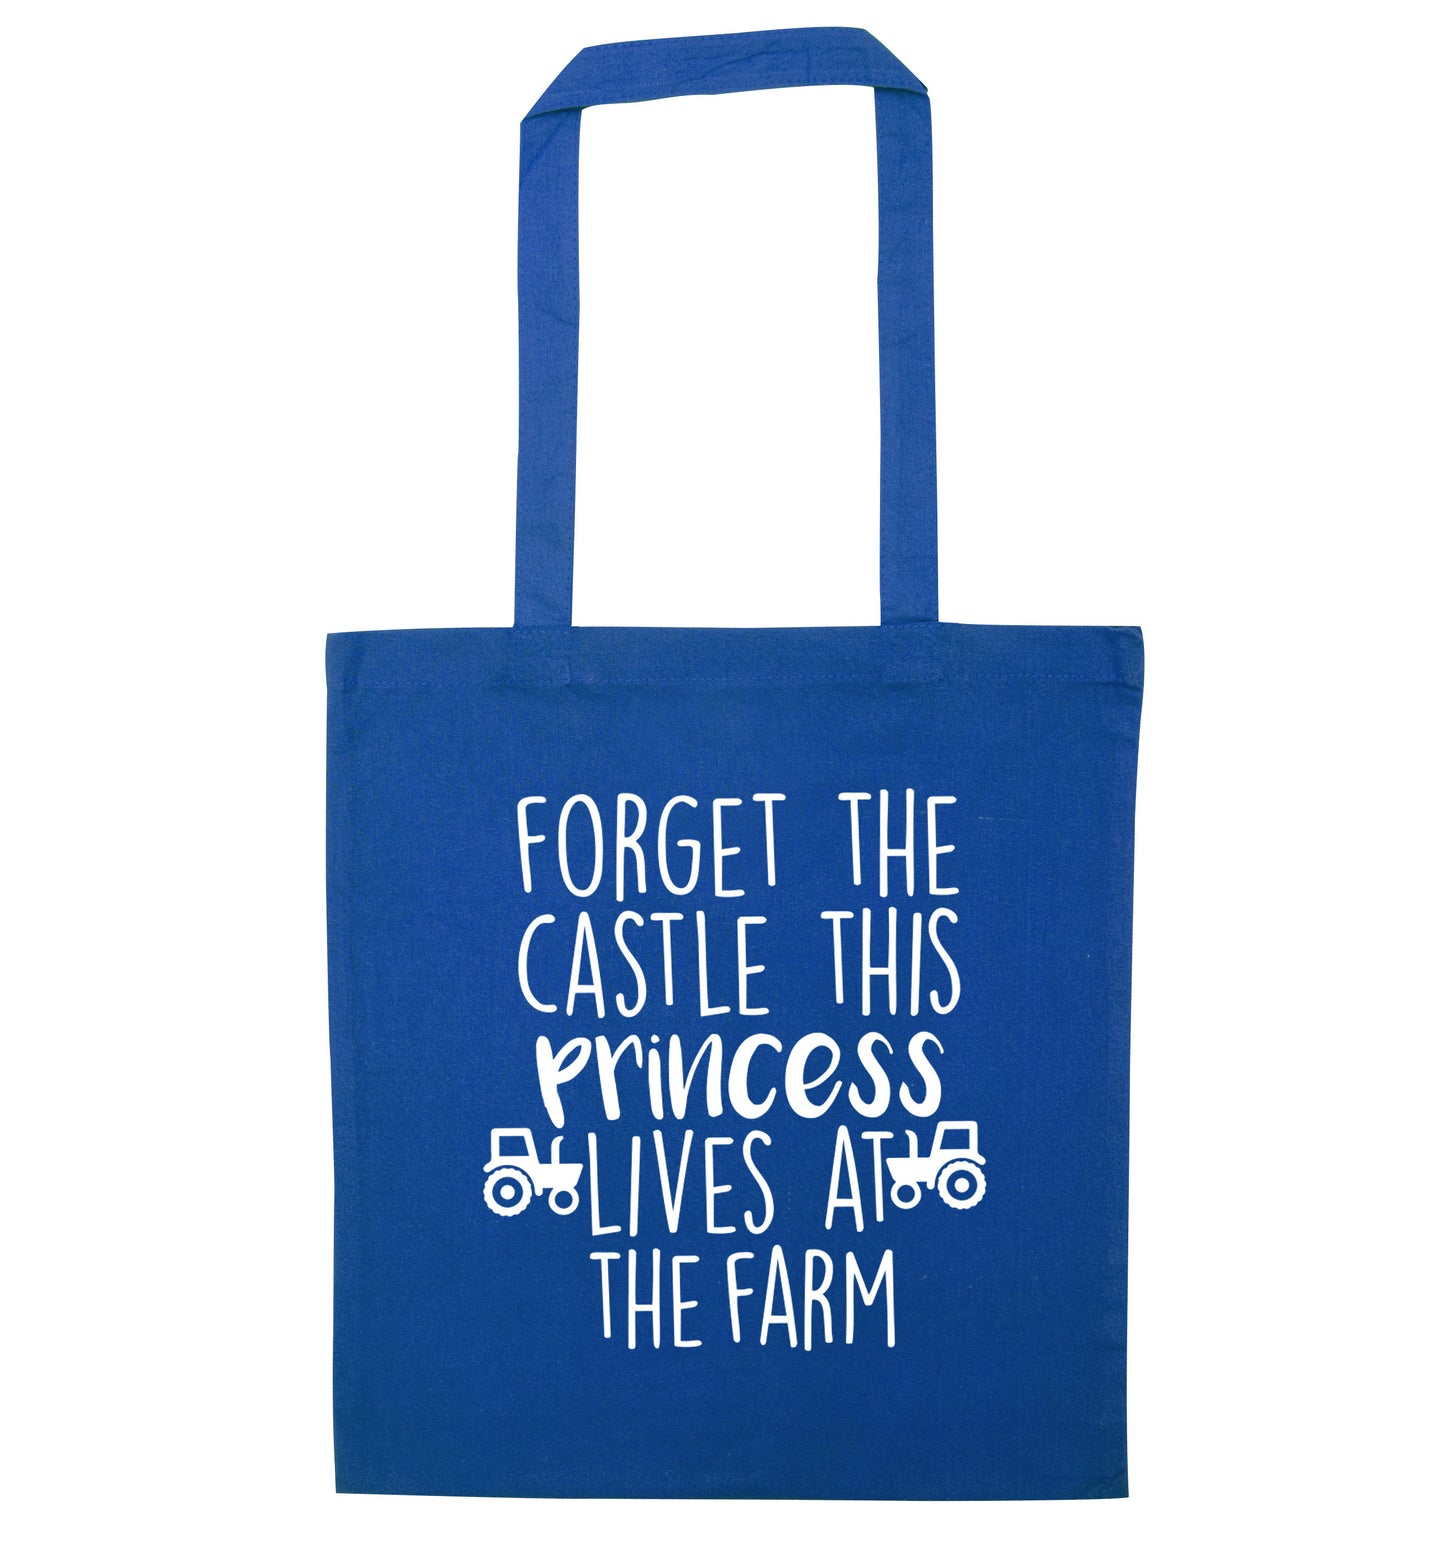 Forget the castle this princess lives at the farm blue tote bag